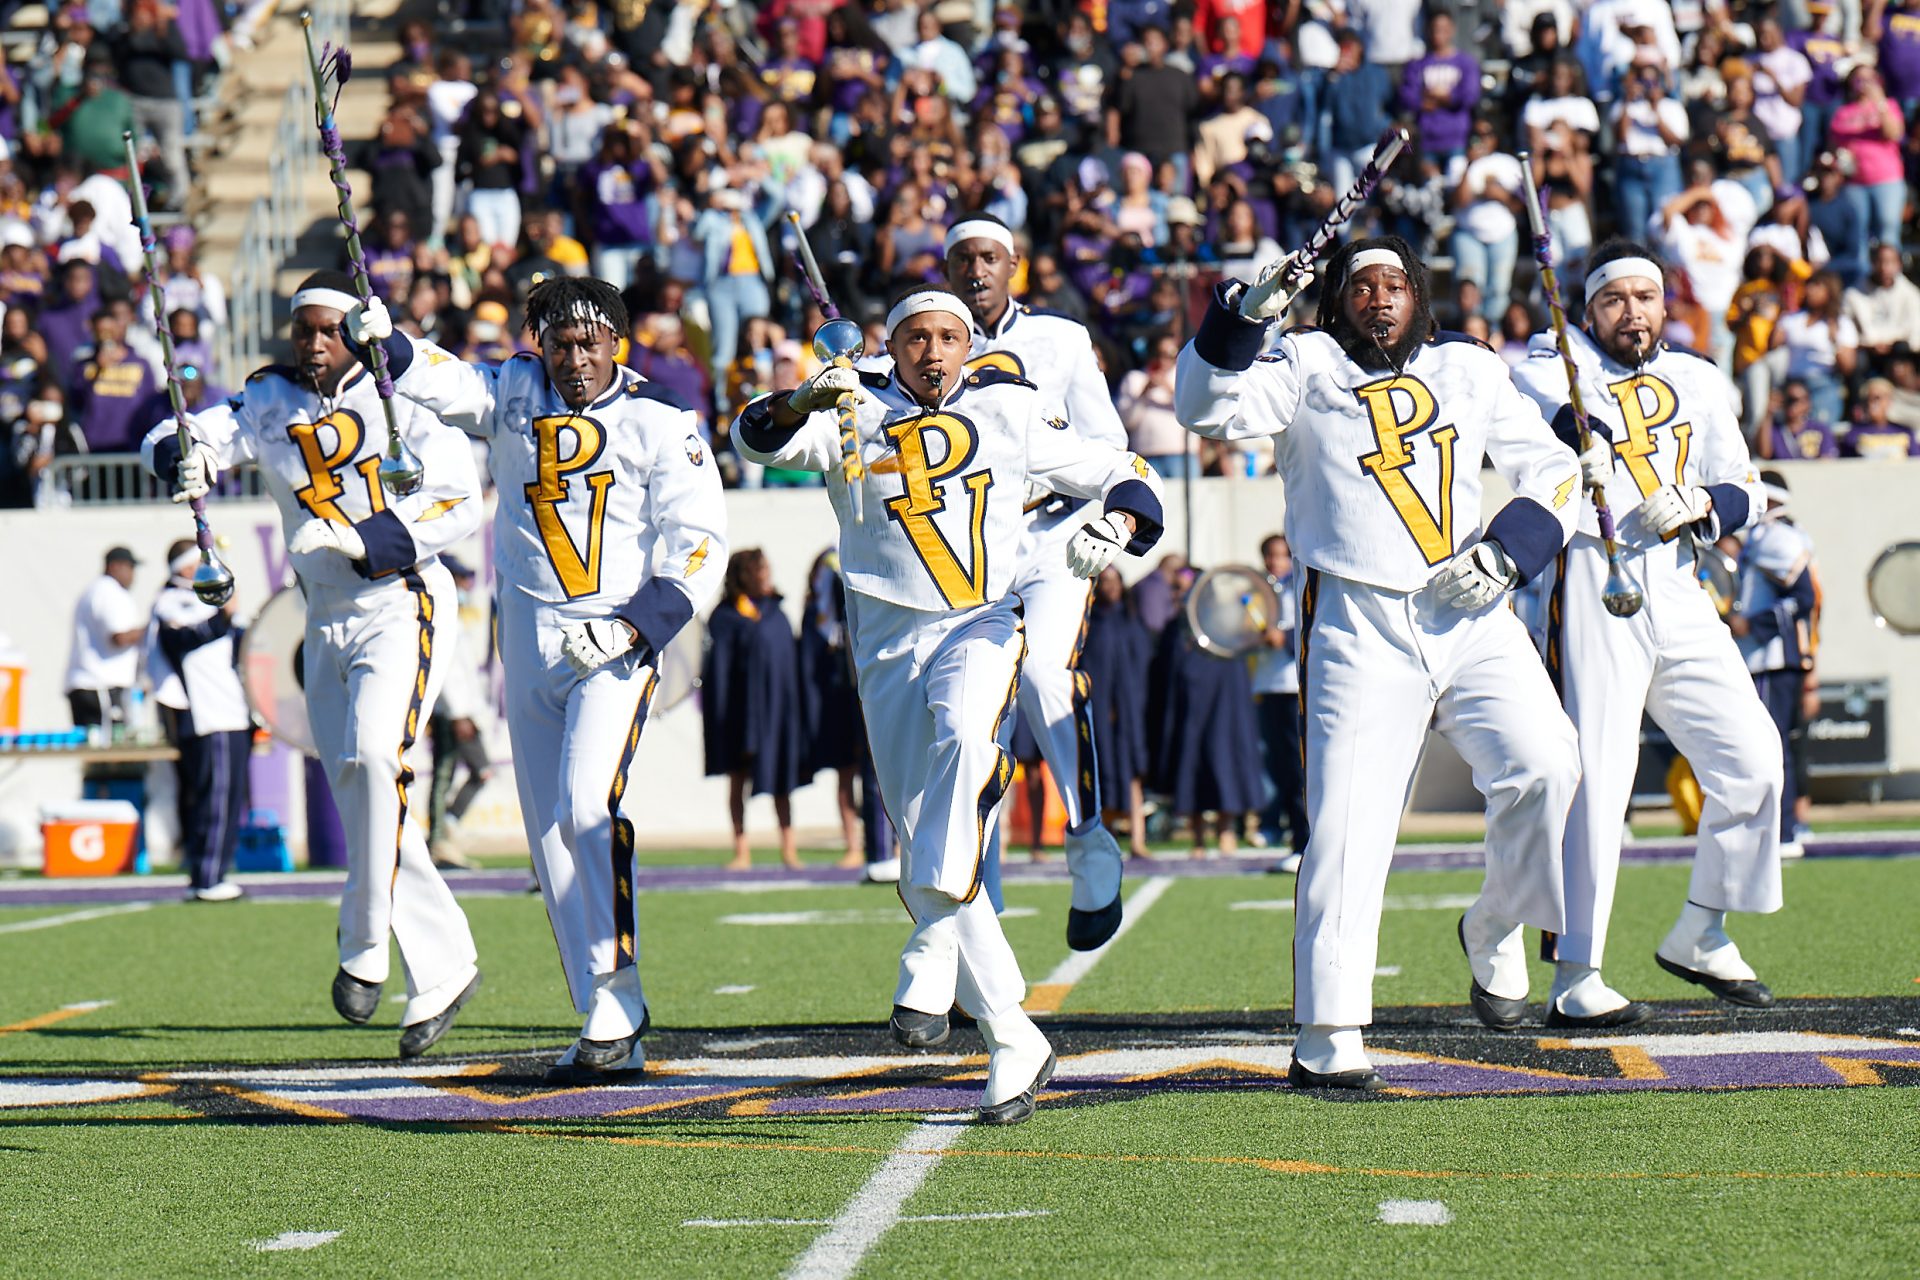 drum majors performing in college marching band PVAMU